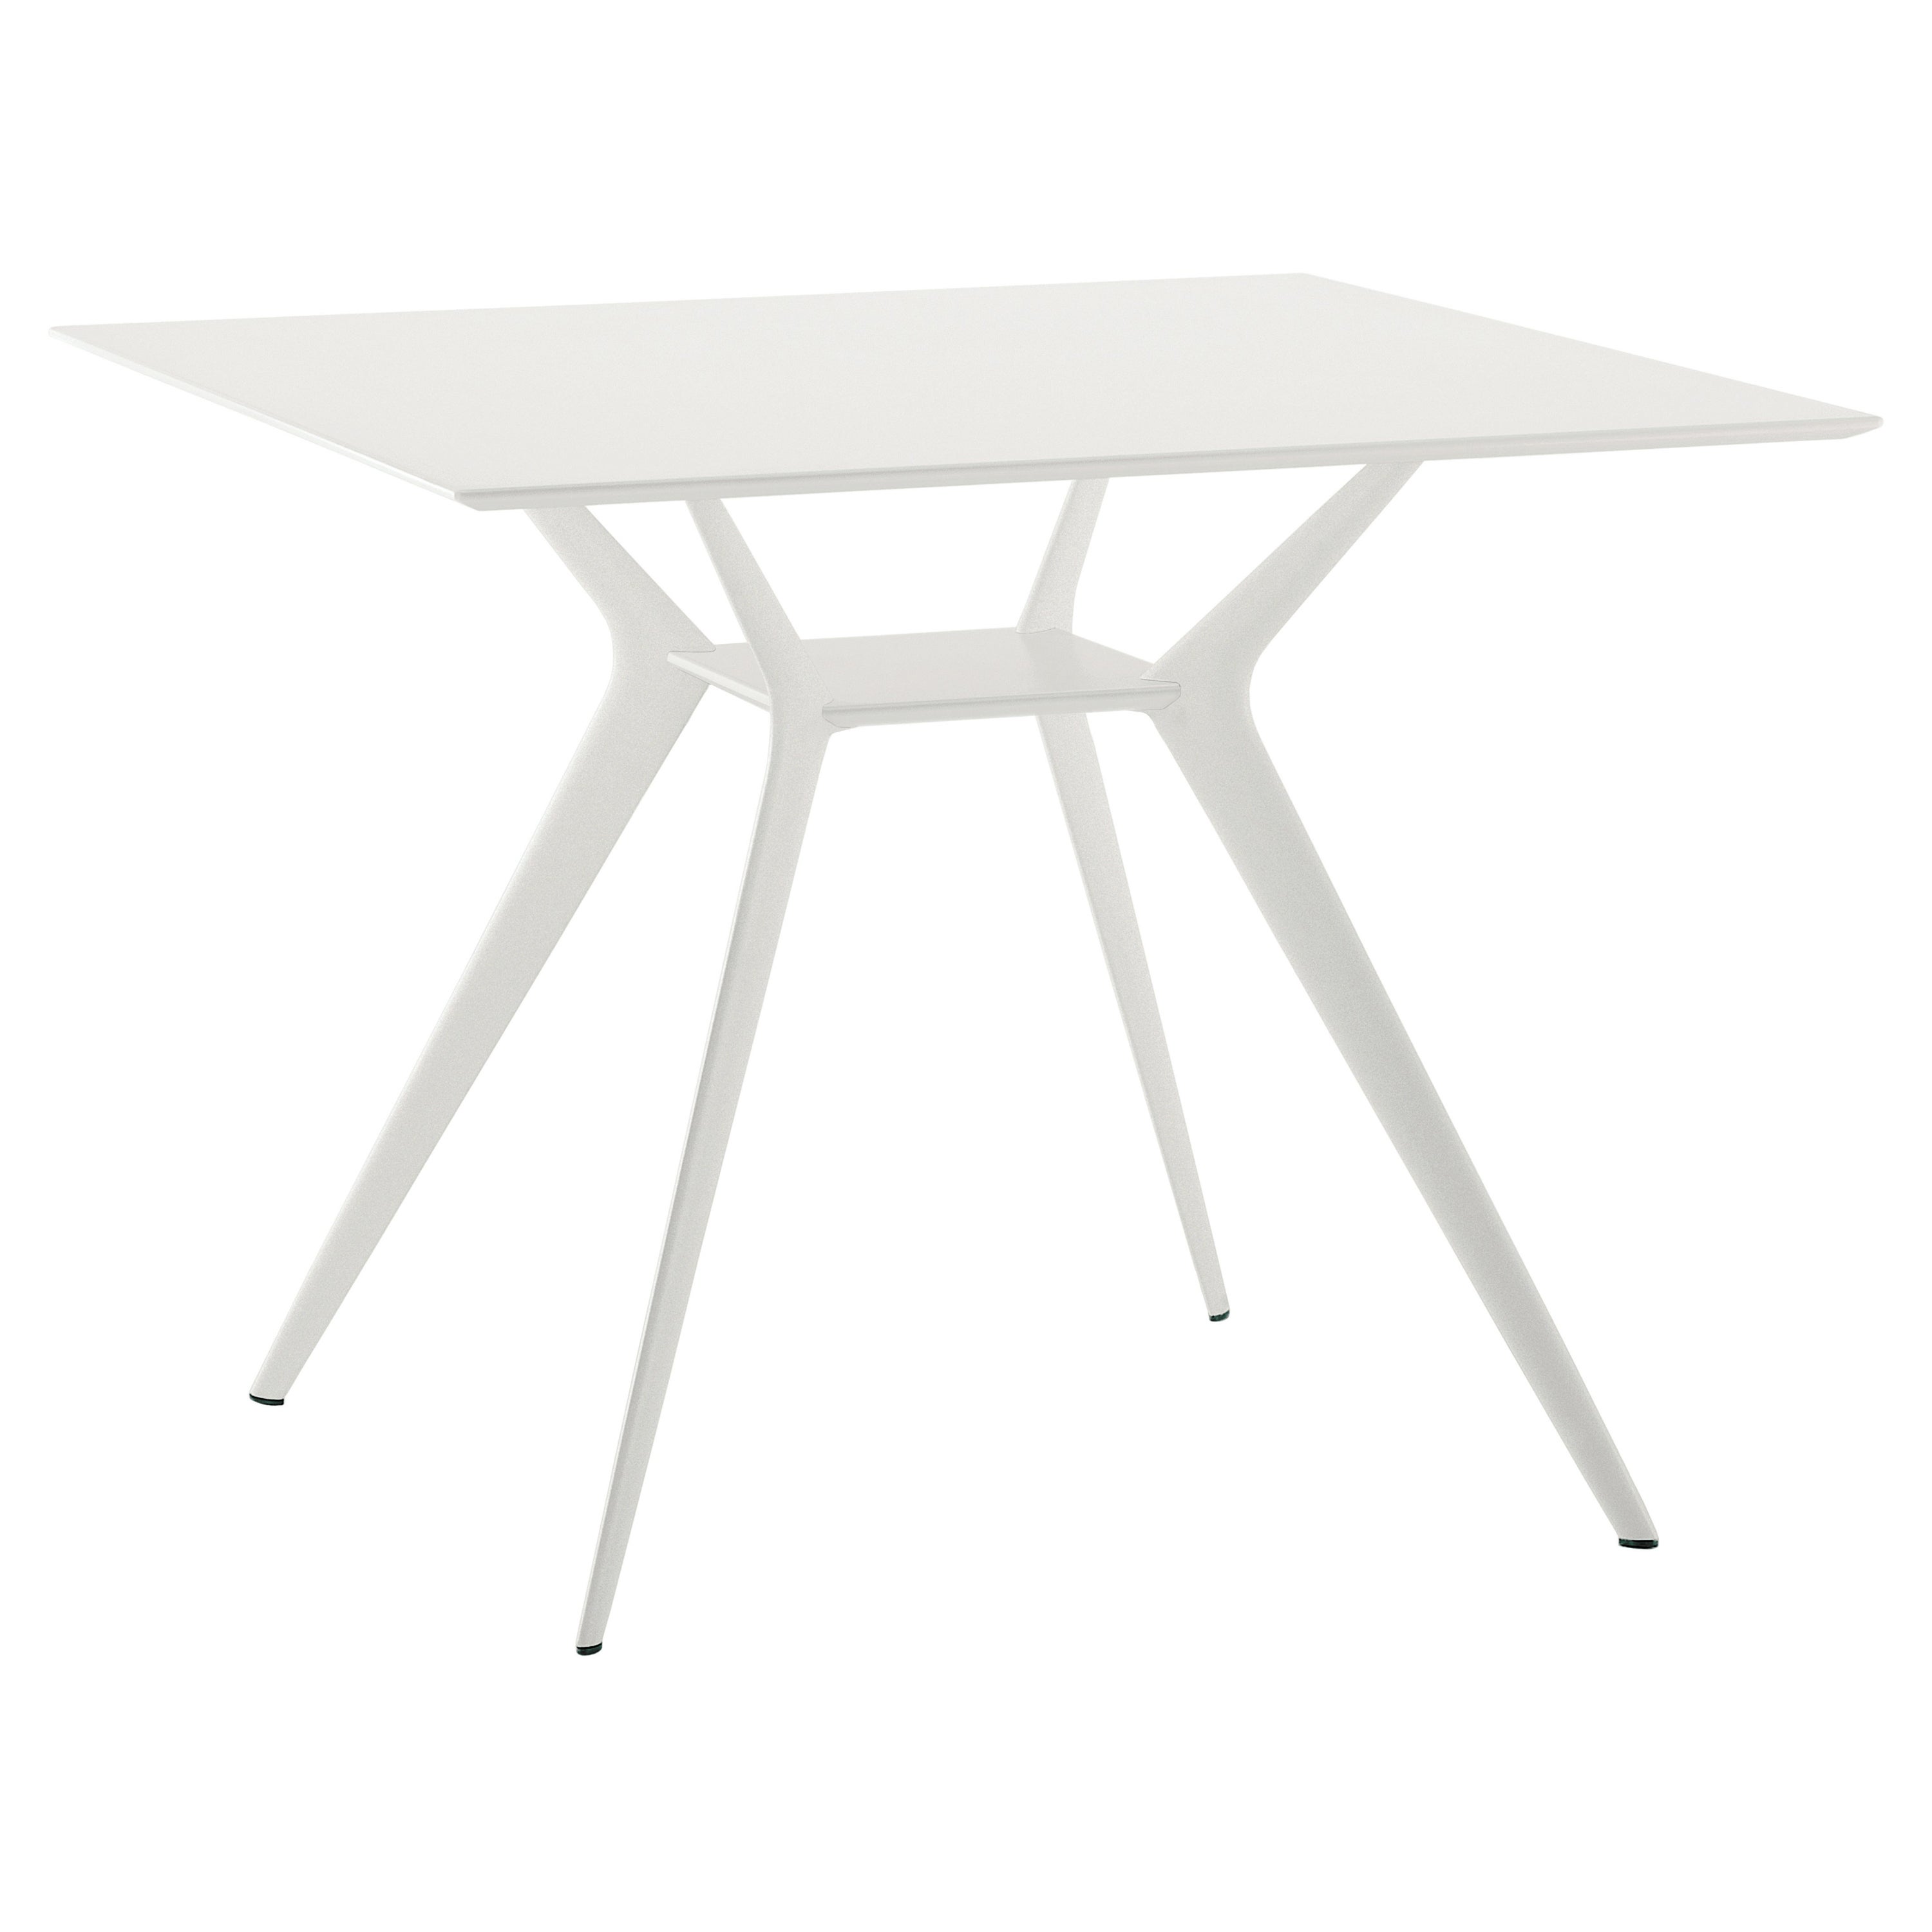 Alias Biplane 400 Table in White MDF Top with White Lacquered Aluminium Frame For Sale